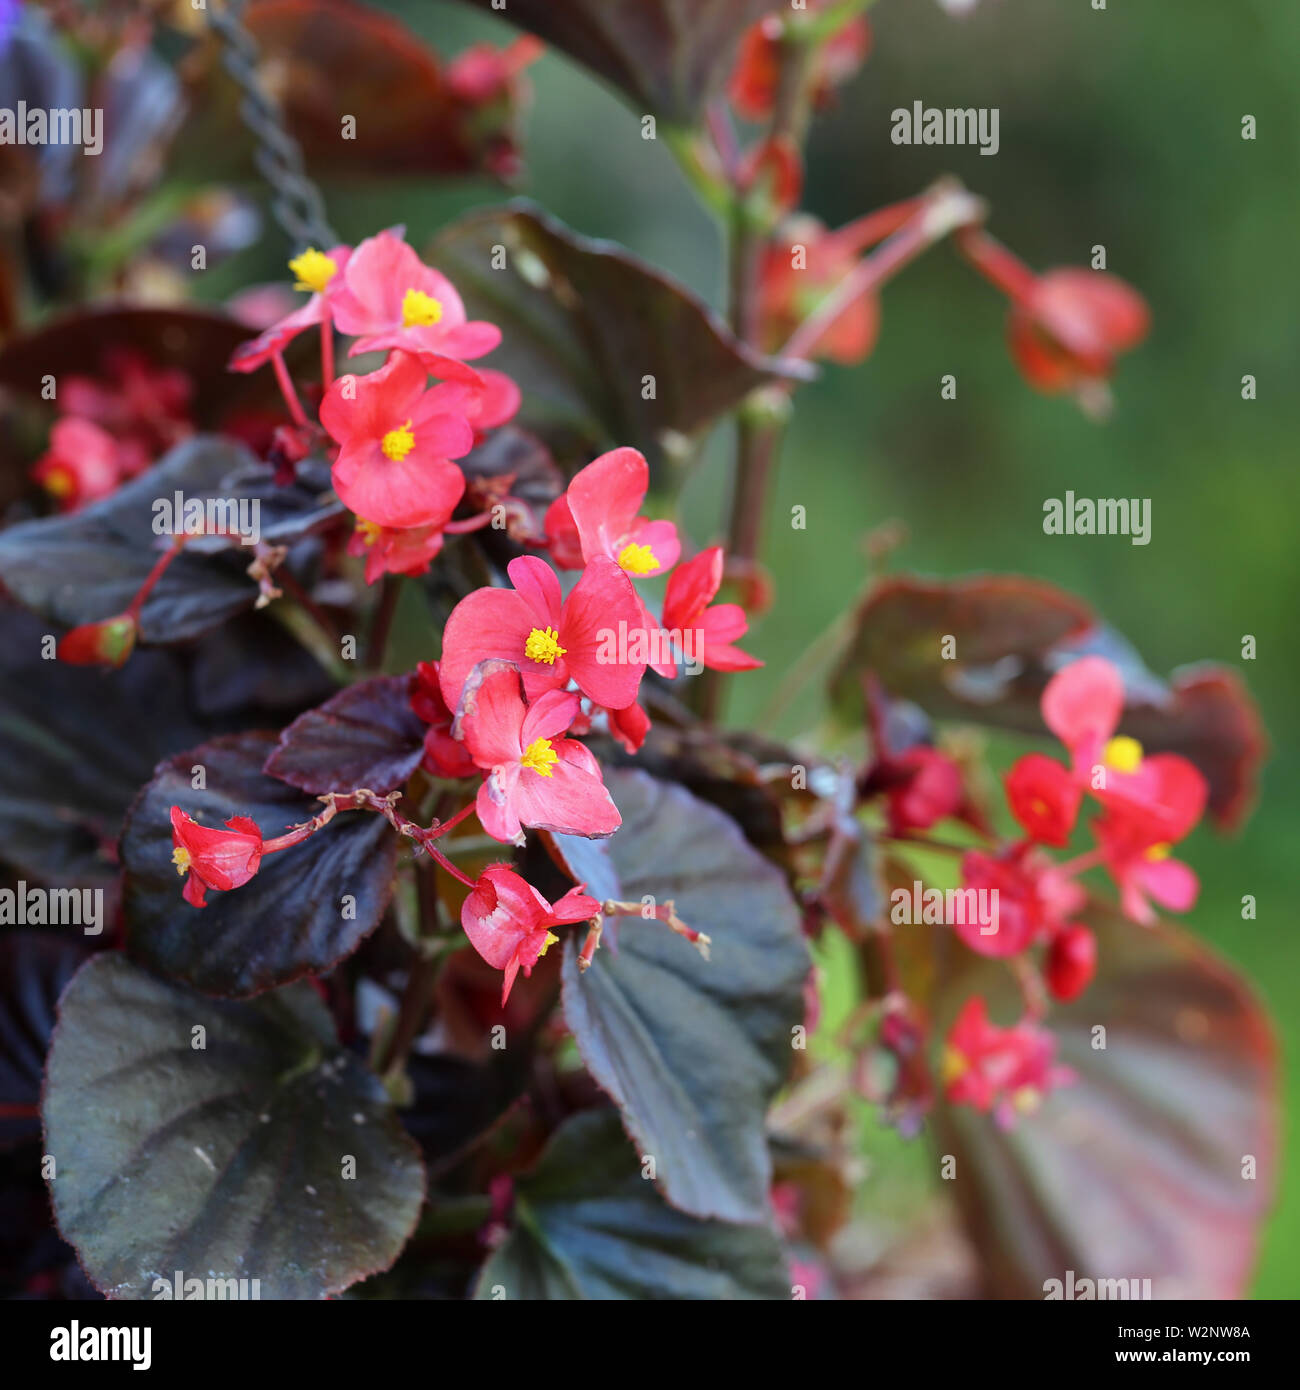 Red begonia flowers in a closeup photo taken with a macro lens in the island of Madeira, Portugal. Beautiful blooming flowers and plenty of leaves. Stock Photo